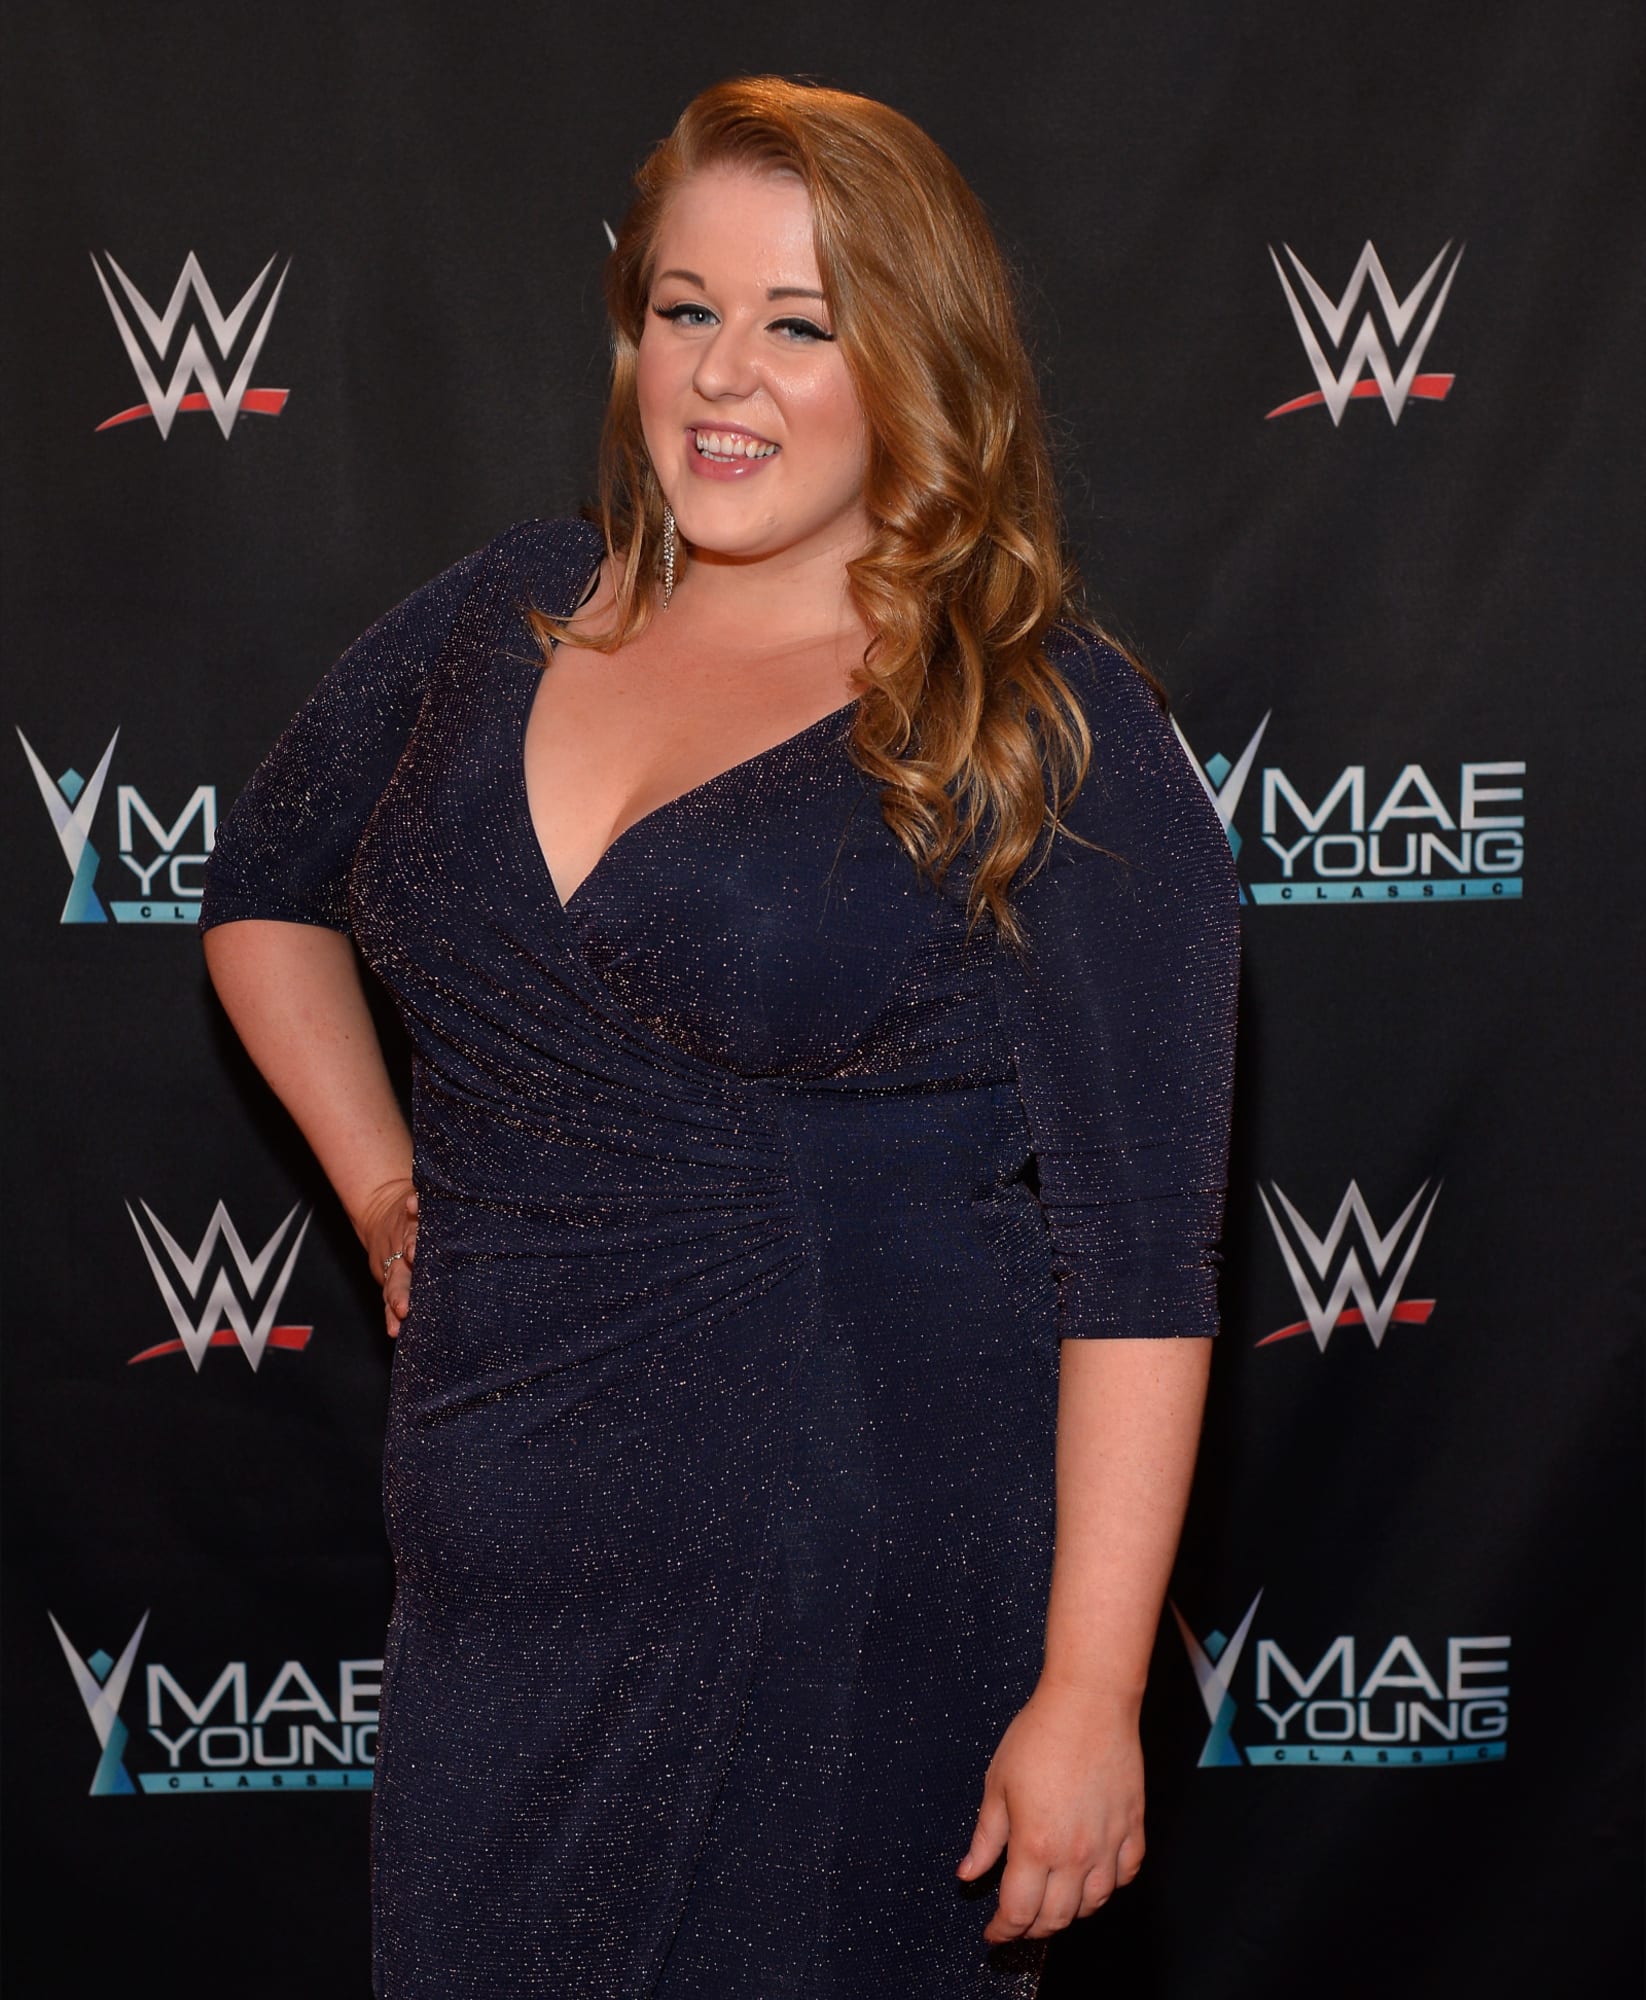 Piper Niven (WWE’s Doudrop) battling against the odds